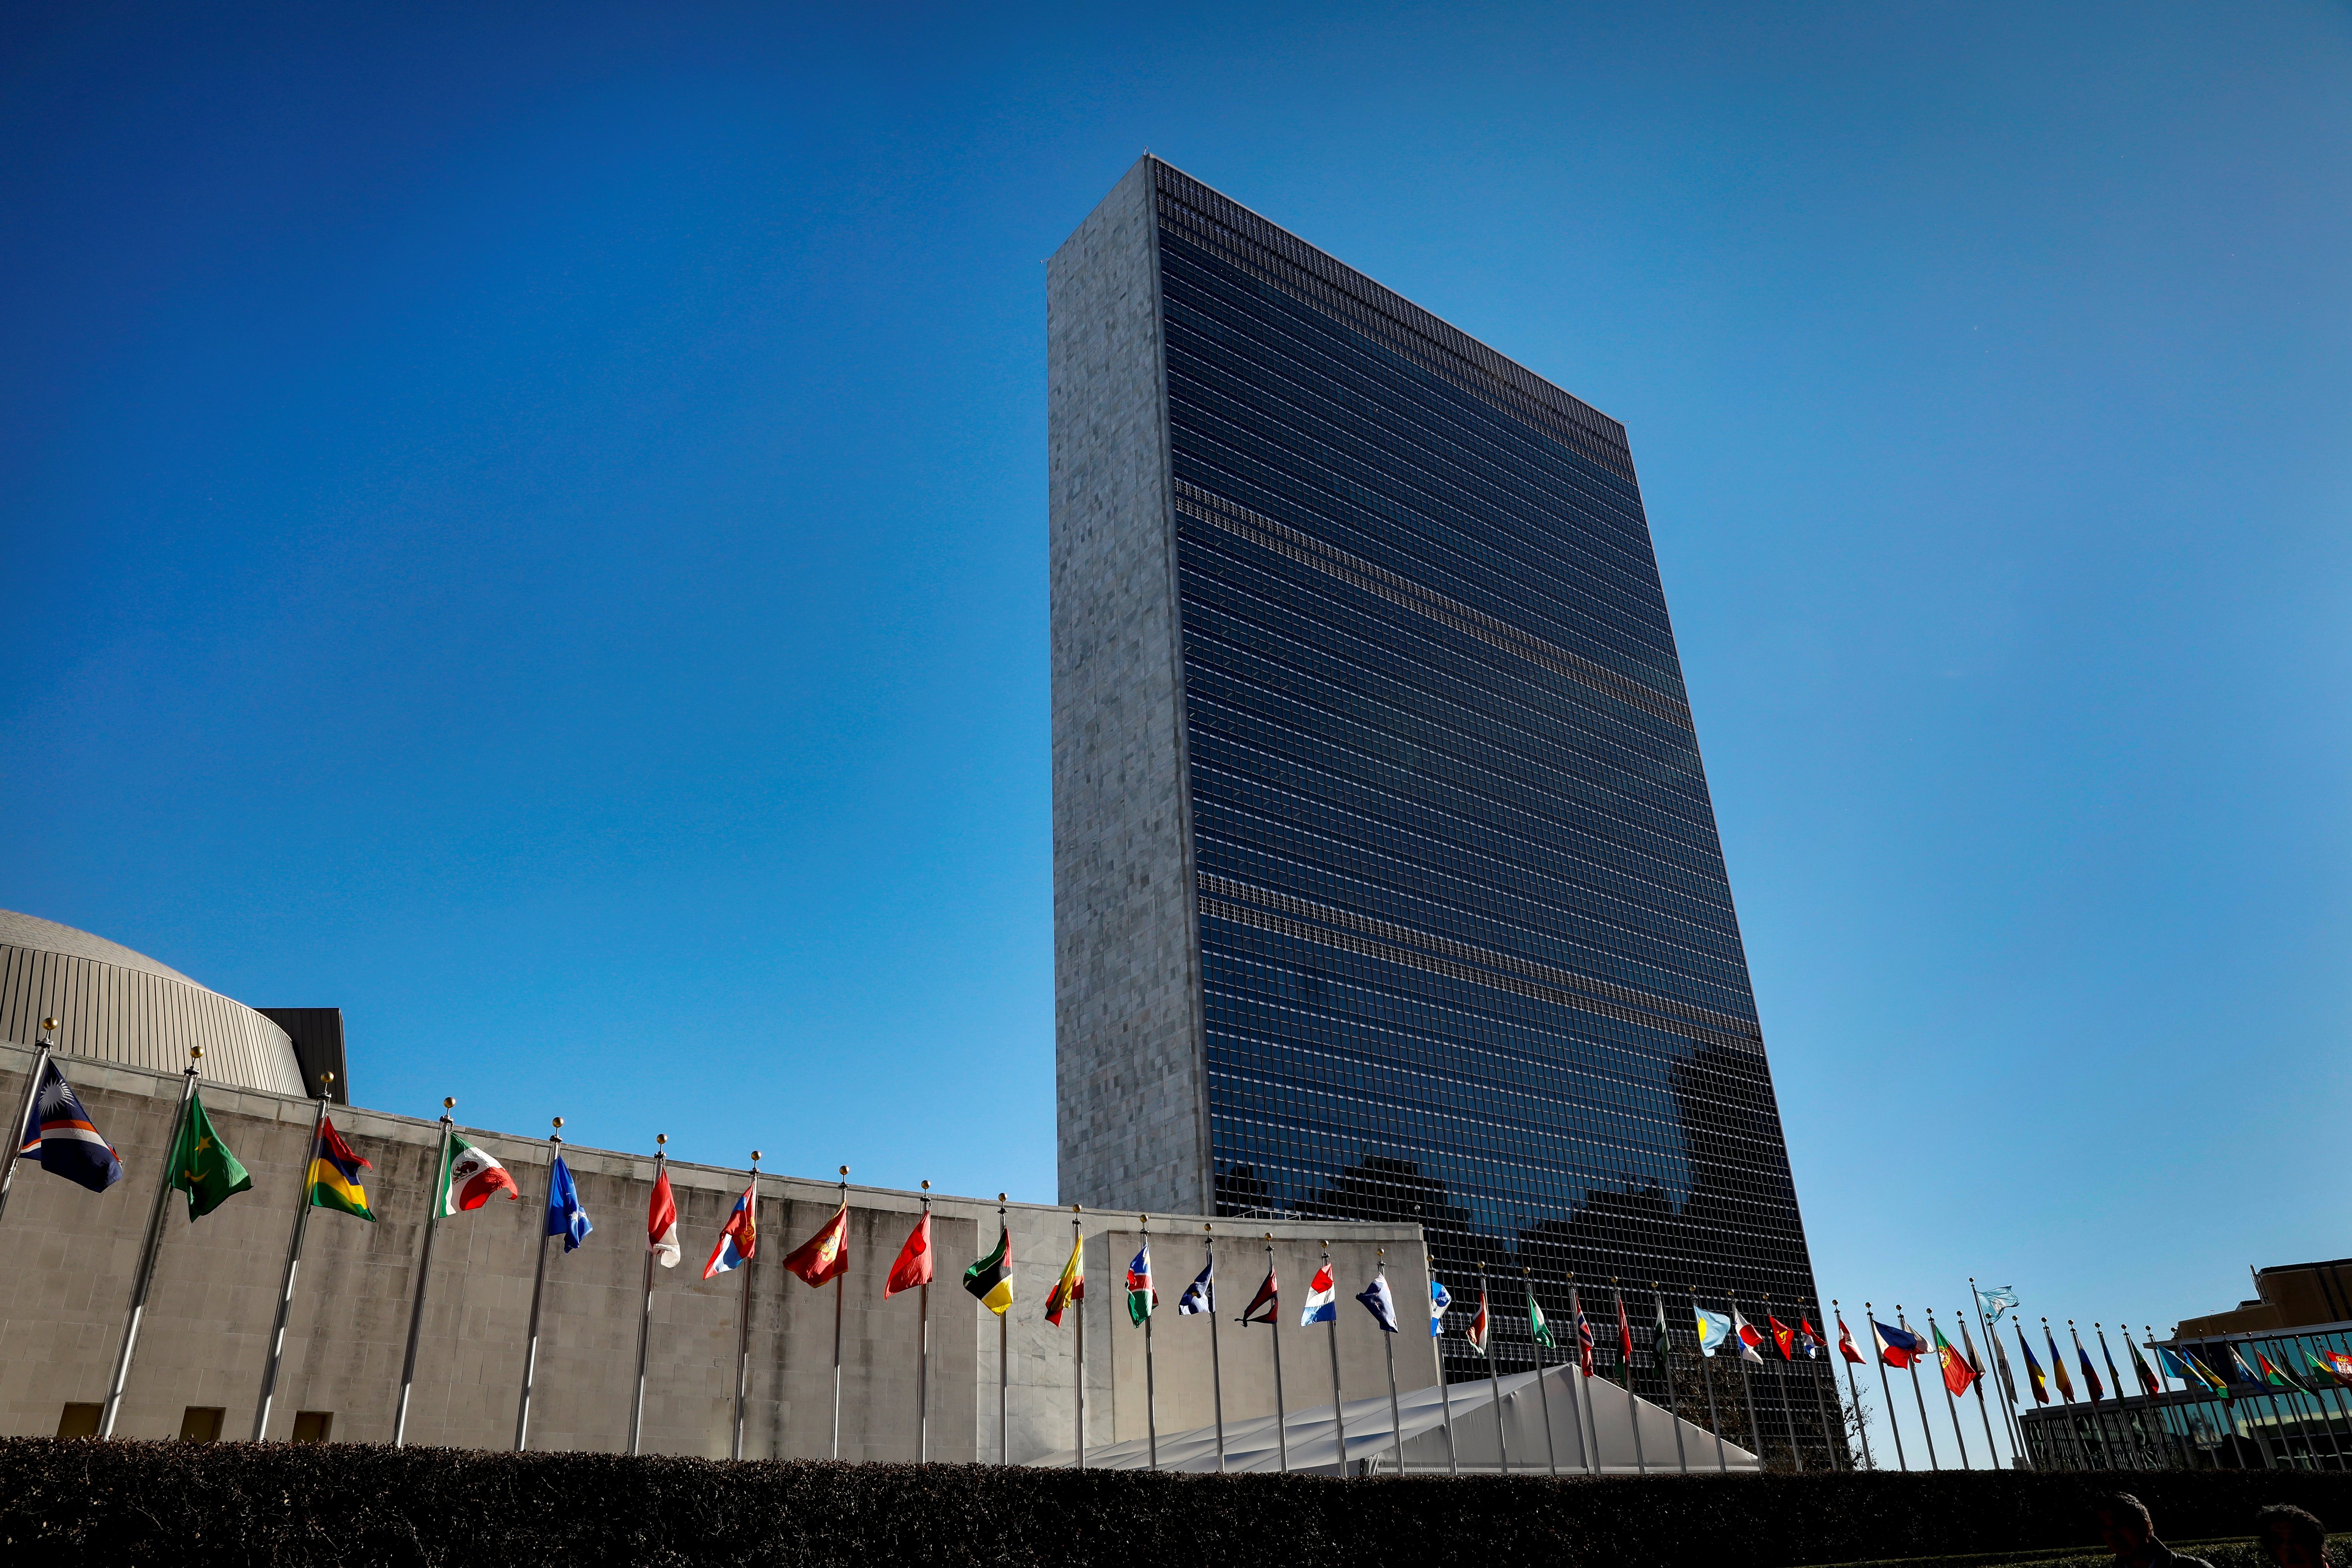 International flags fly in front of The United Nations Headquarters building in New York